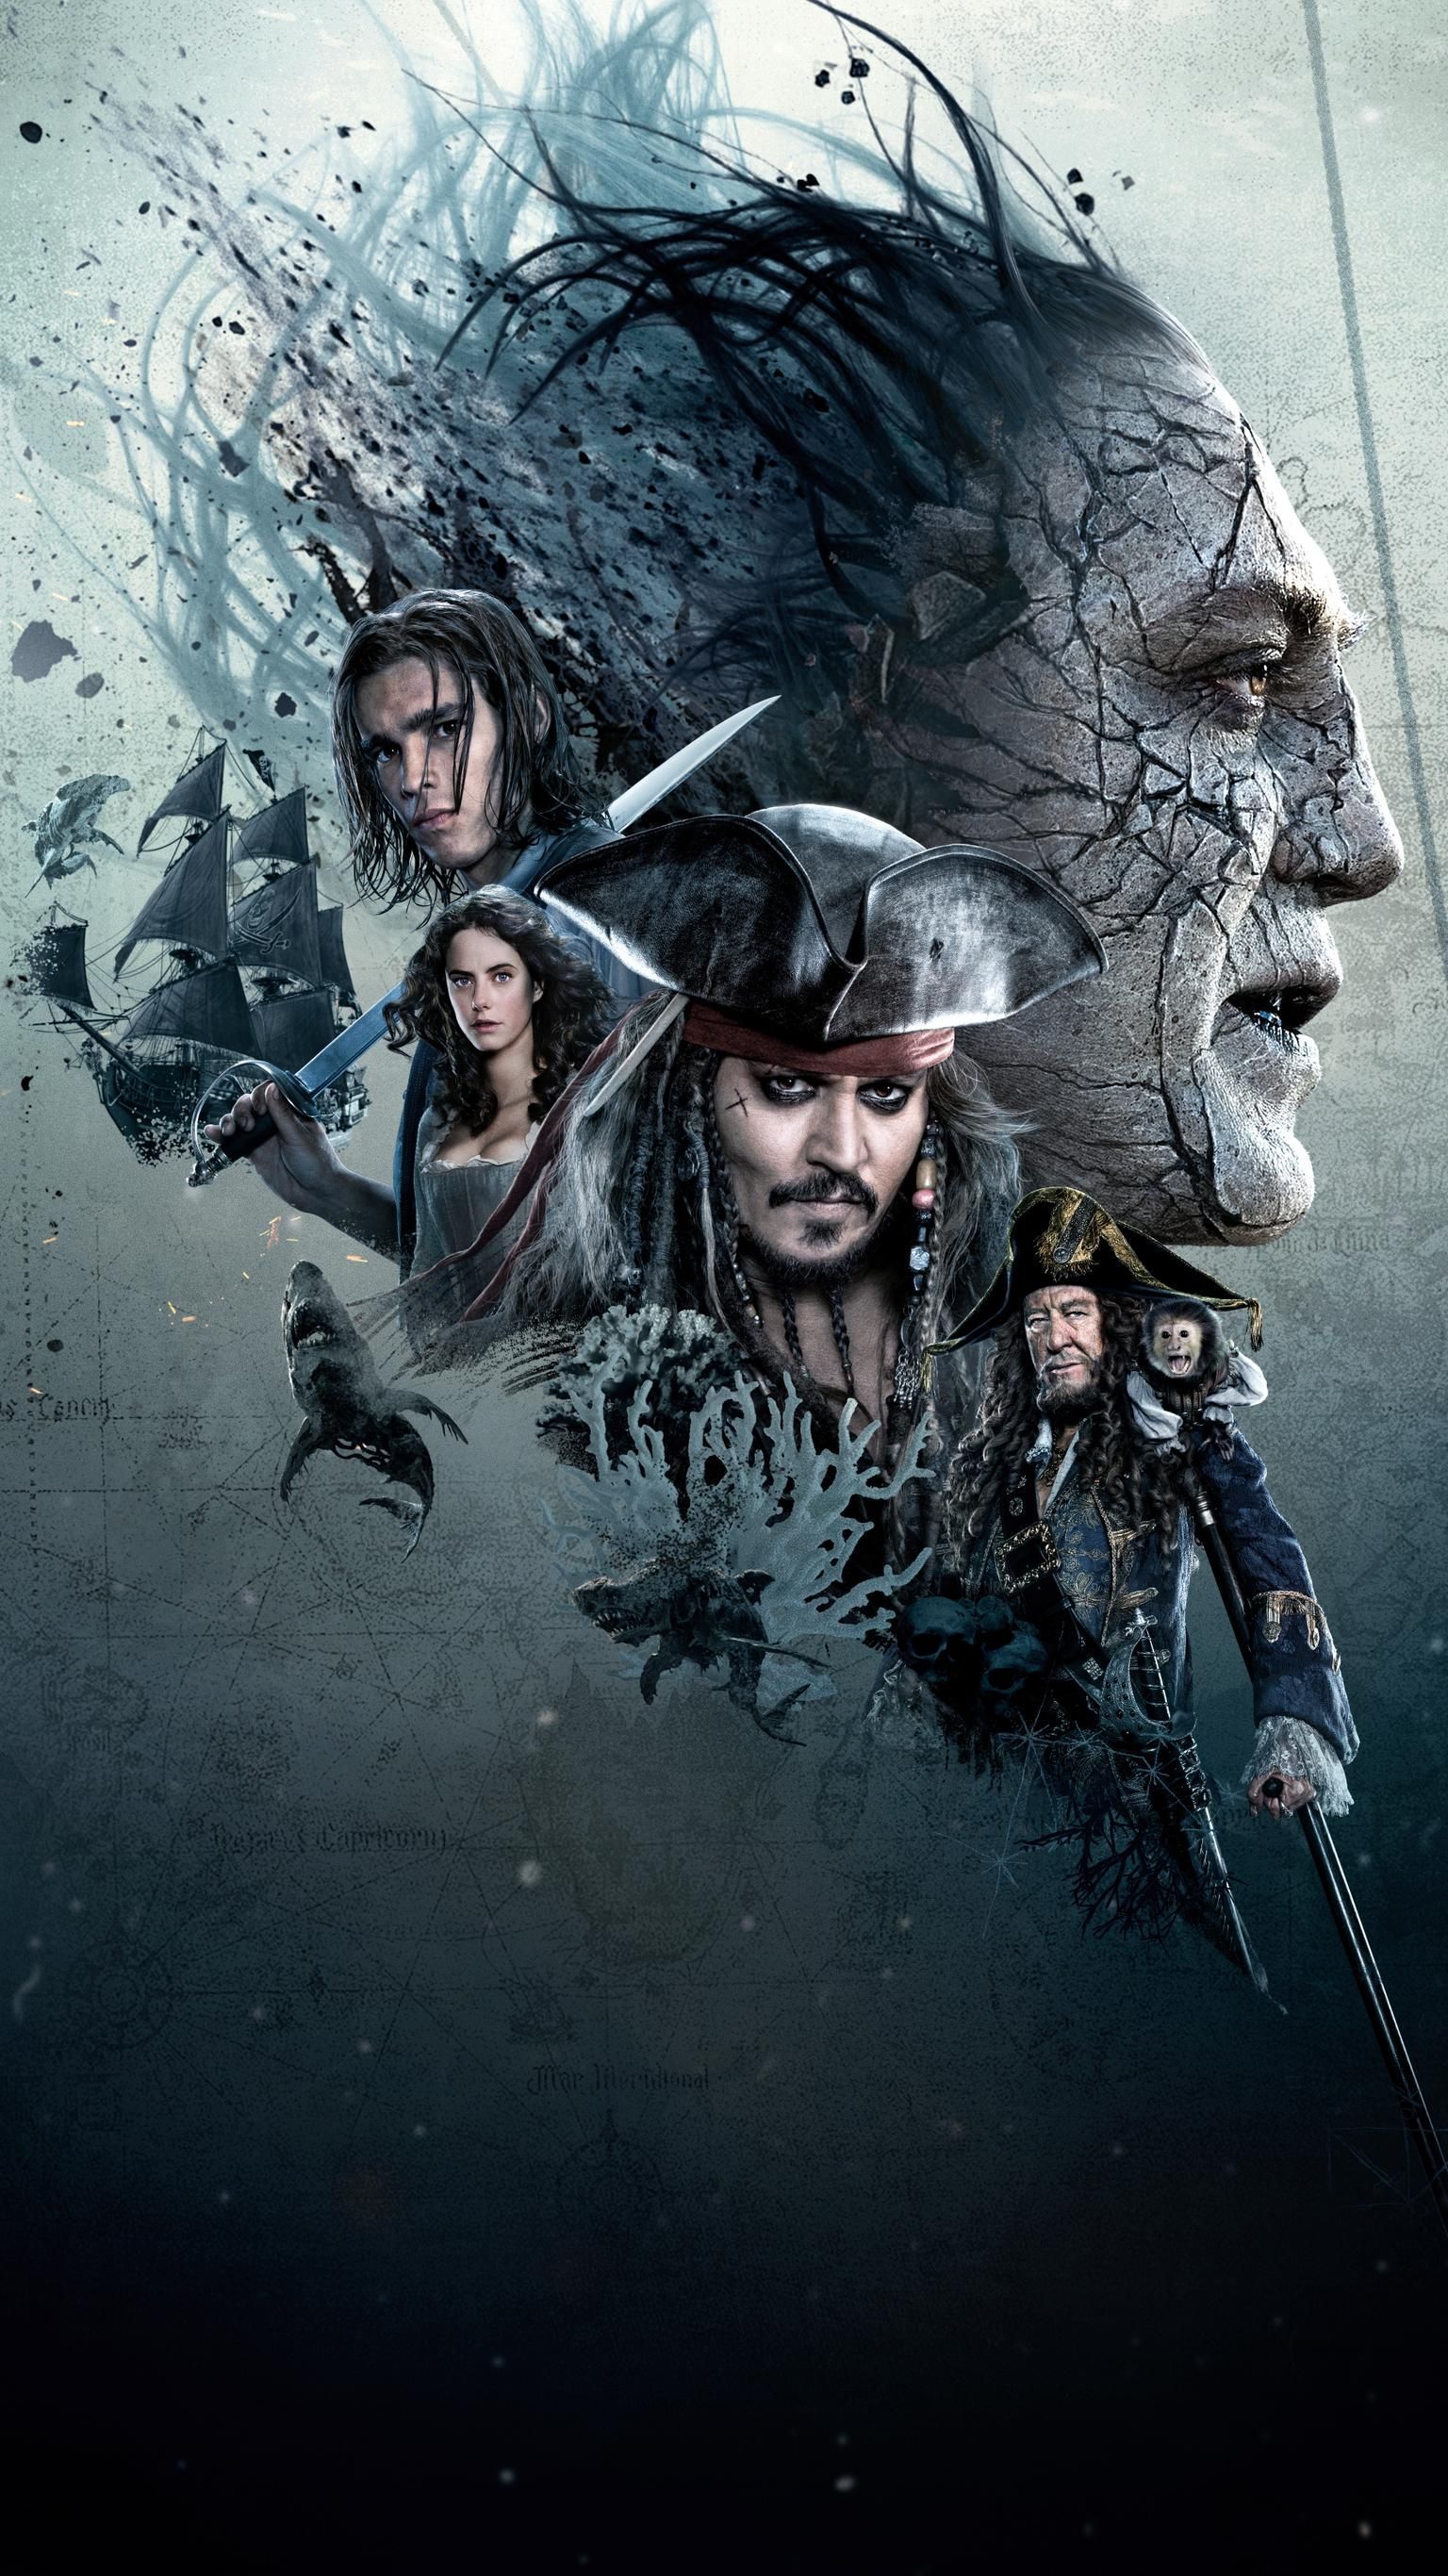 A poster for the movie pirates of caribbean - Pirate